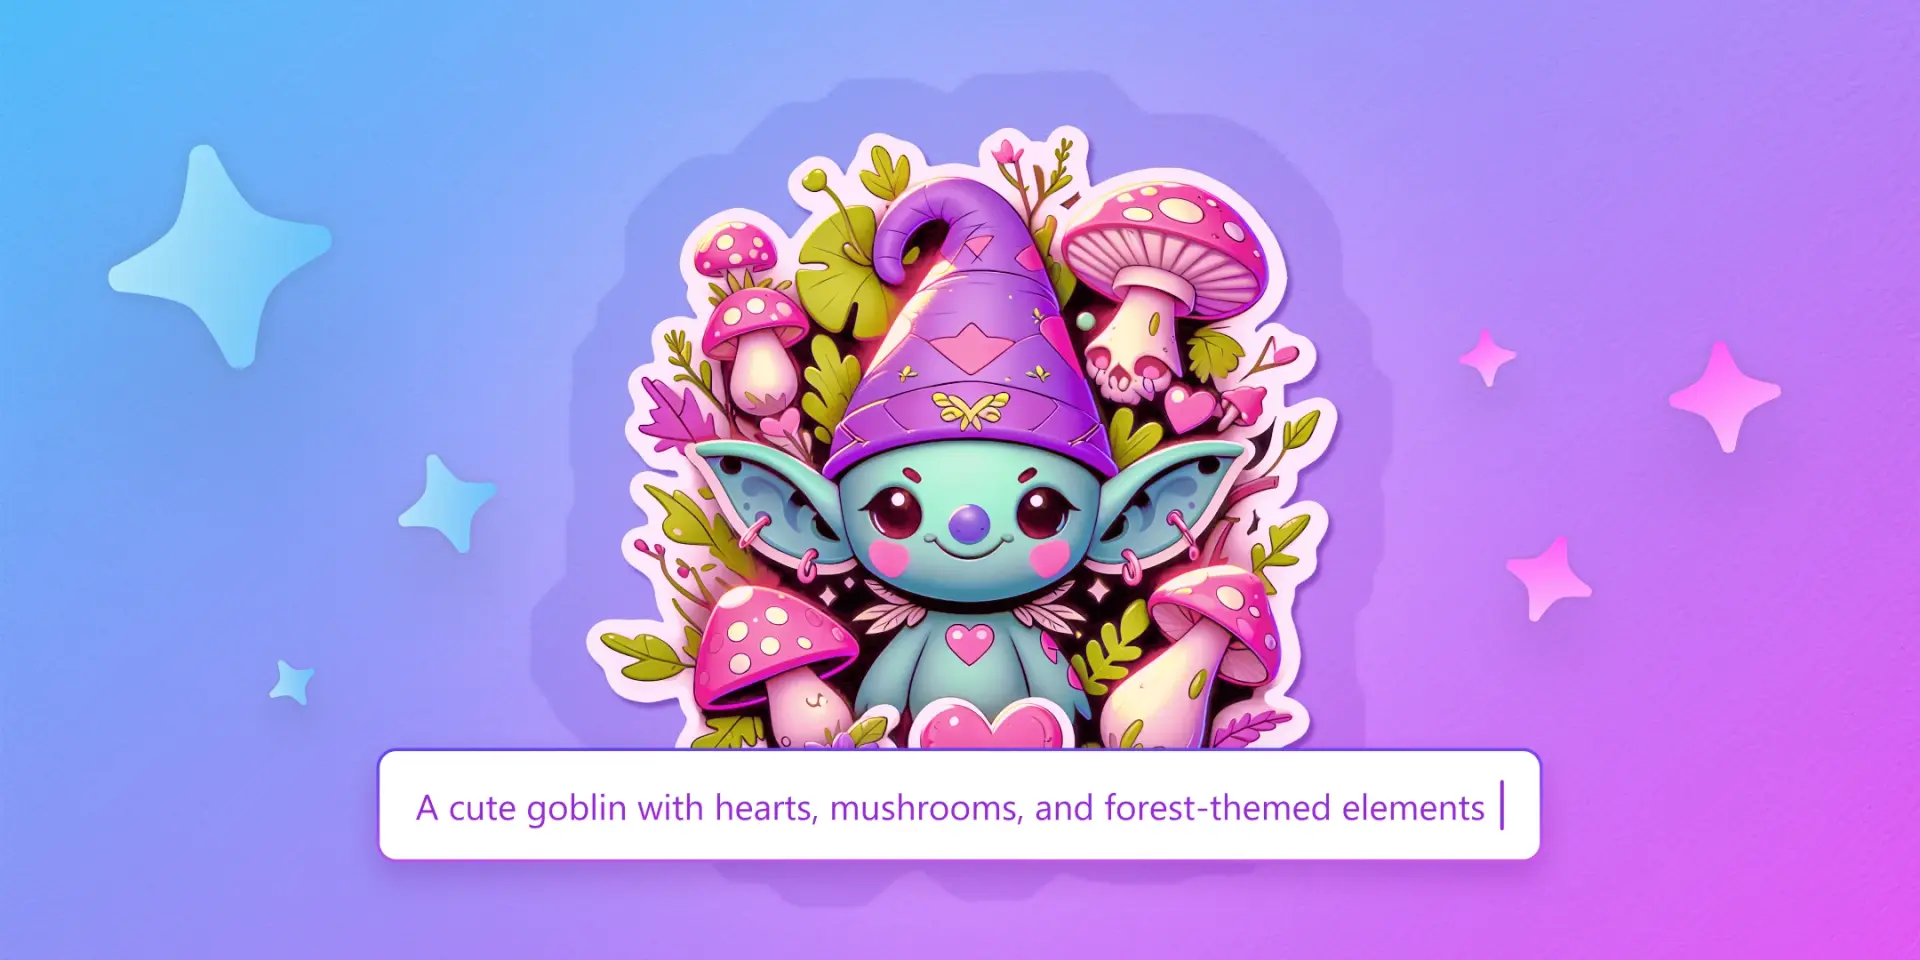 A color-adjusted picture of the goblin sticker we created in this blog post, along with the prompt that created it ("A cute goblin with hearts, mushrooms, and forest-themed elements")